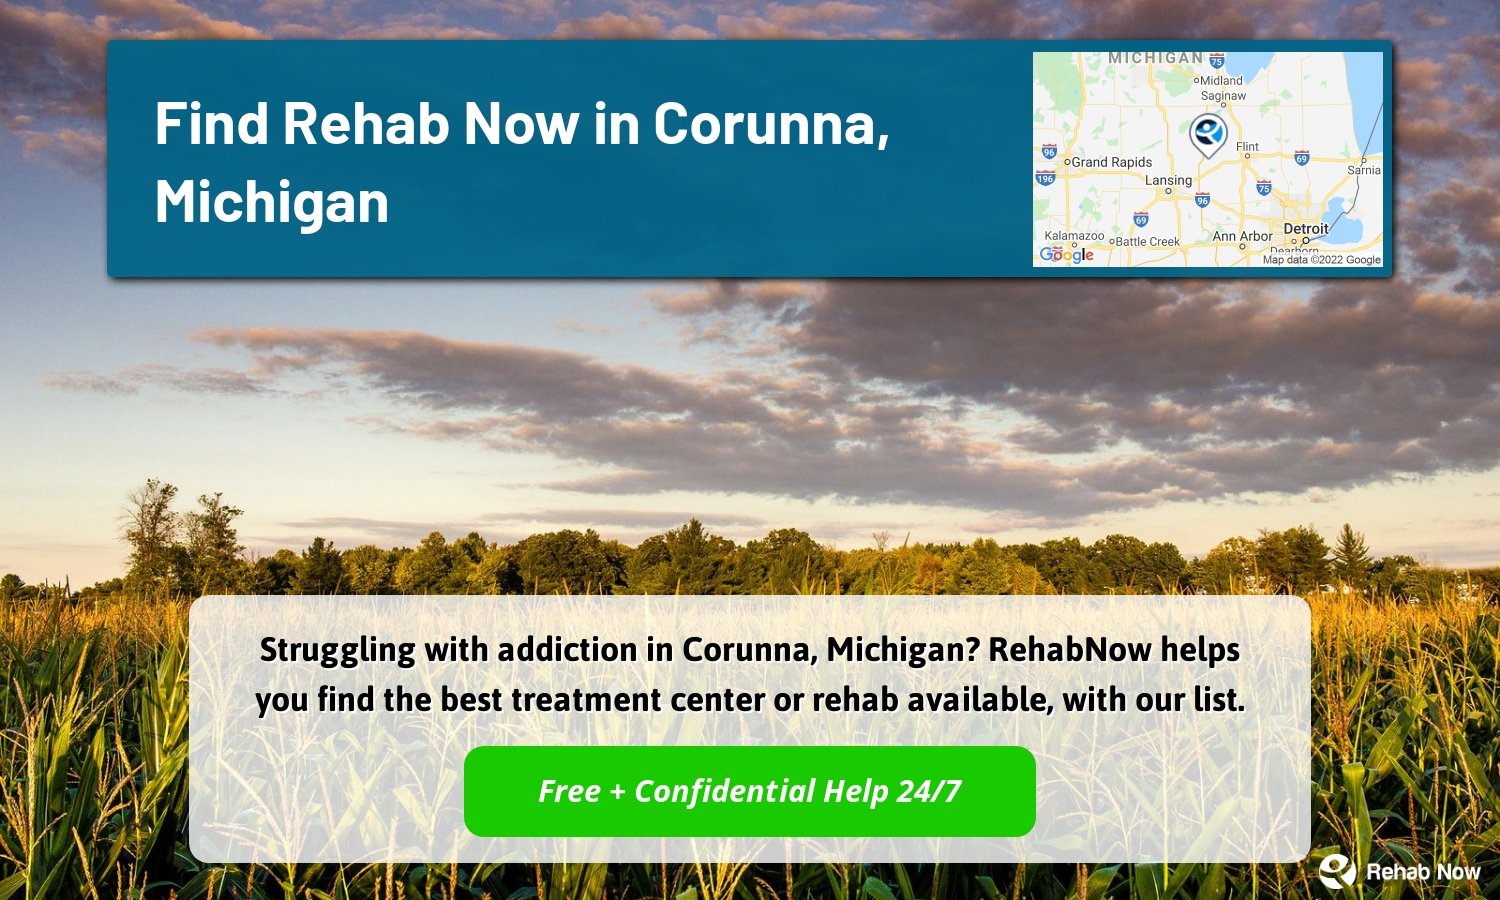 Struggling with addiction in Corunna, Michigan? RehabNow helps you find the best treatment center or rehab available, with our list.